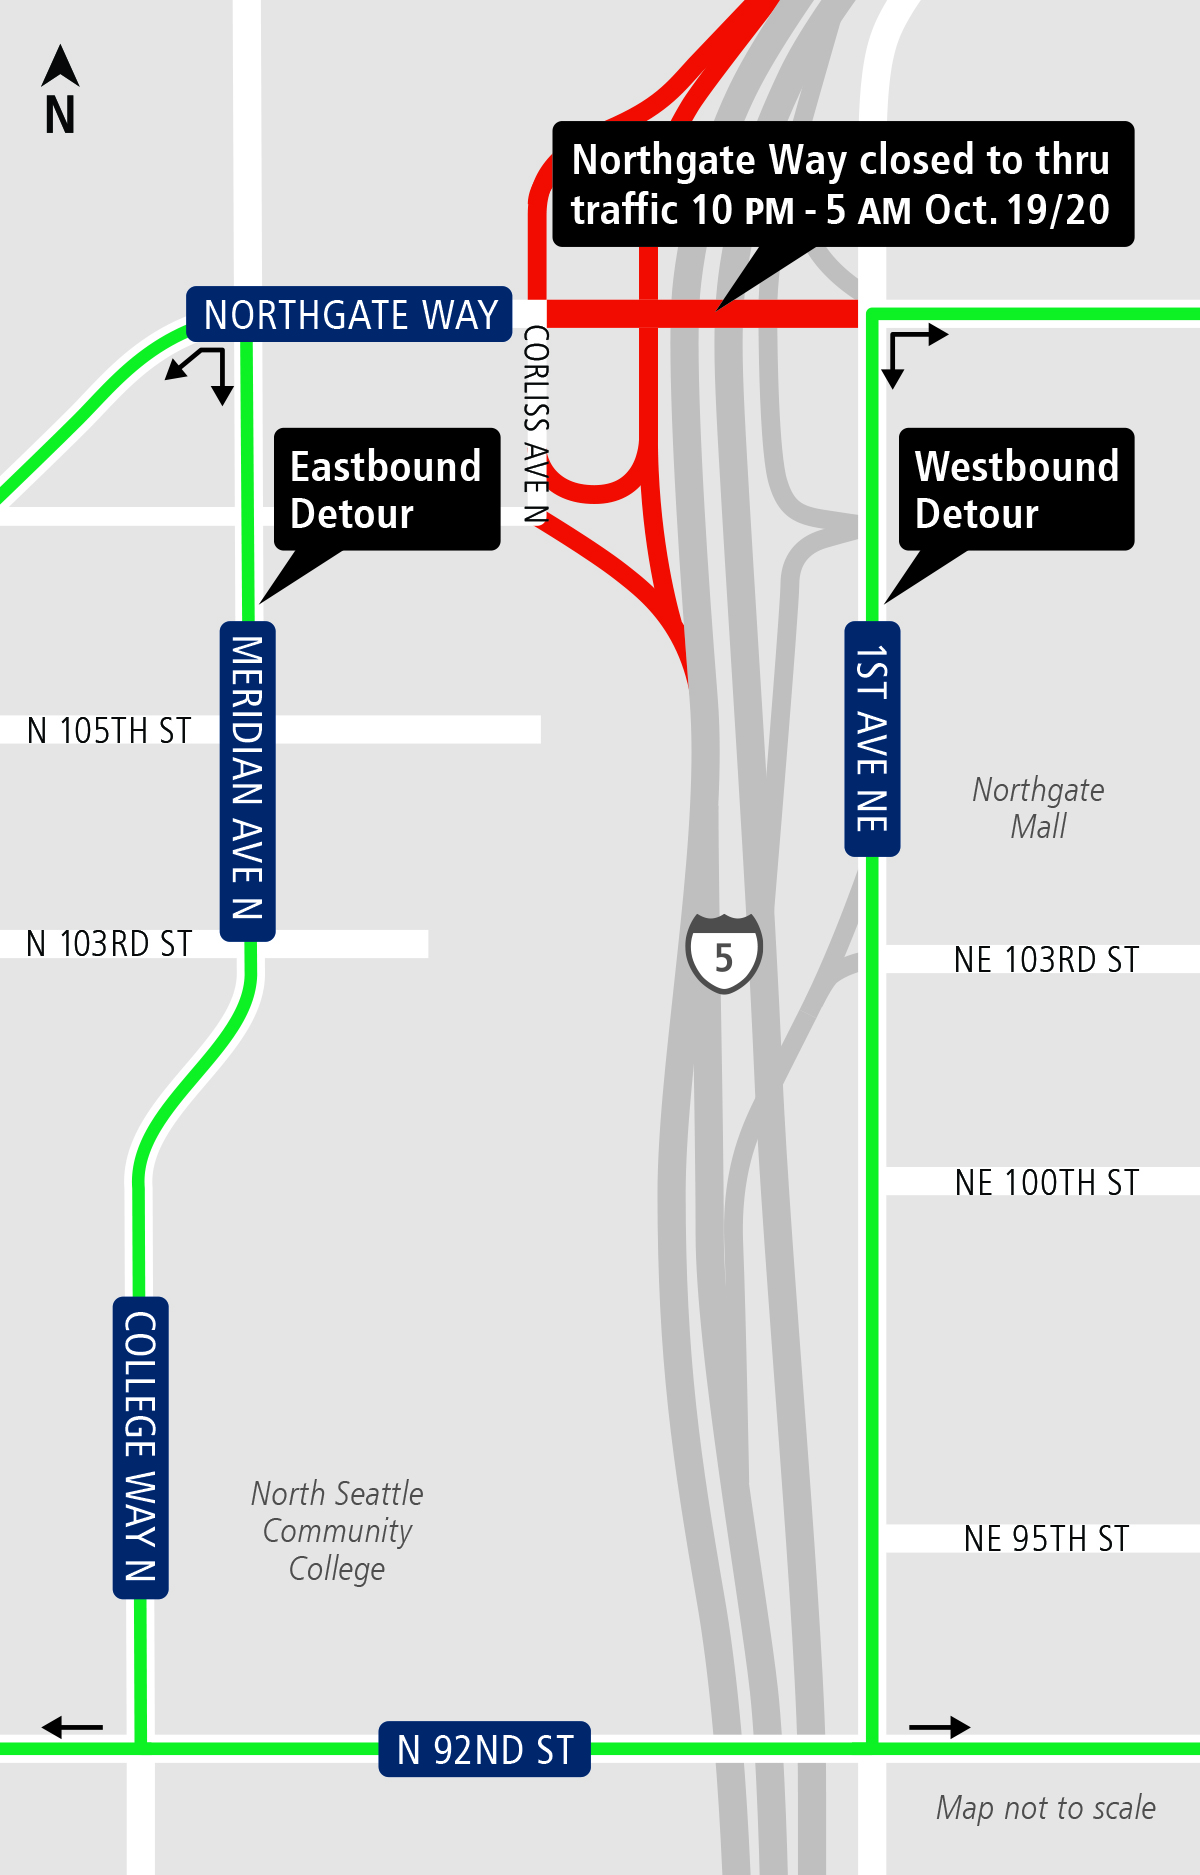 Map of construction on Northgate Way Oct. 19-20